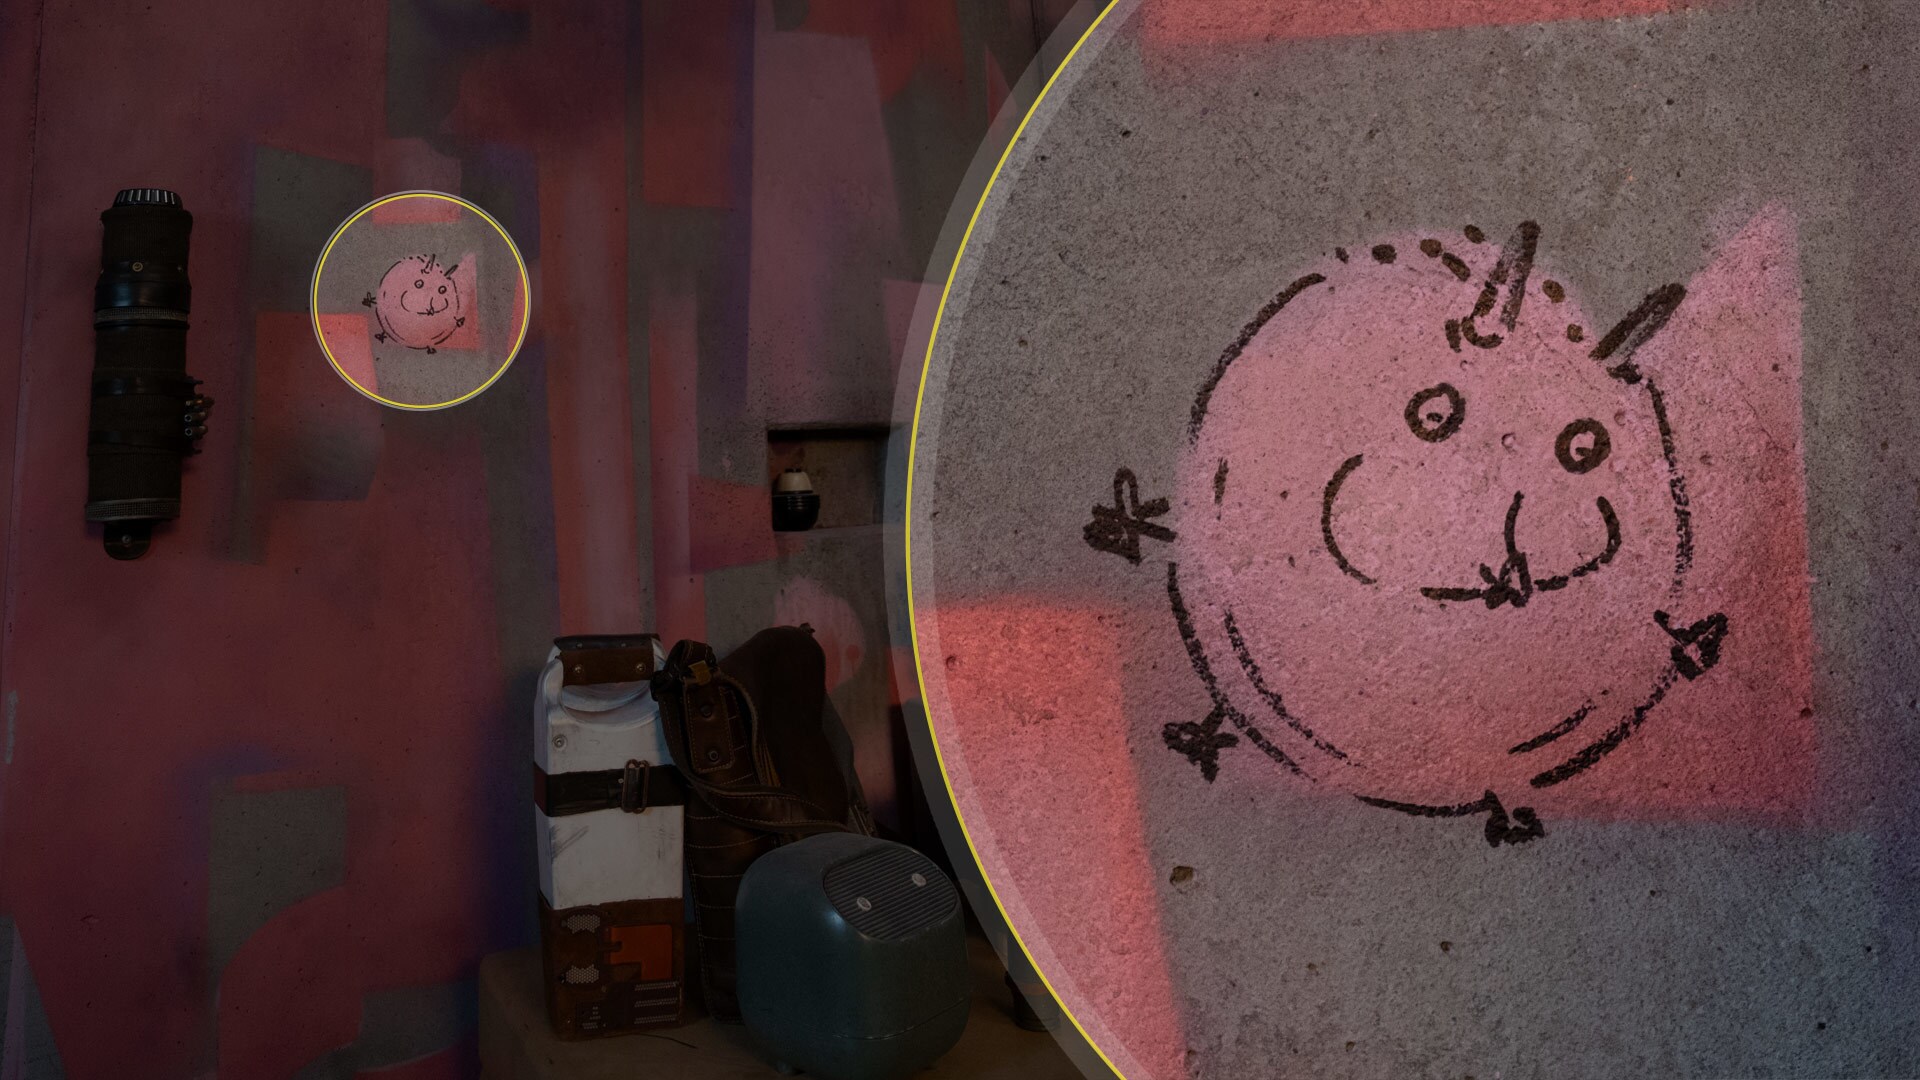 On one wall, Sabine has sketched a doodle of a puffer pig fully inflated.